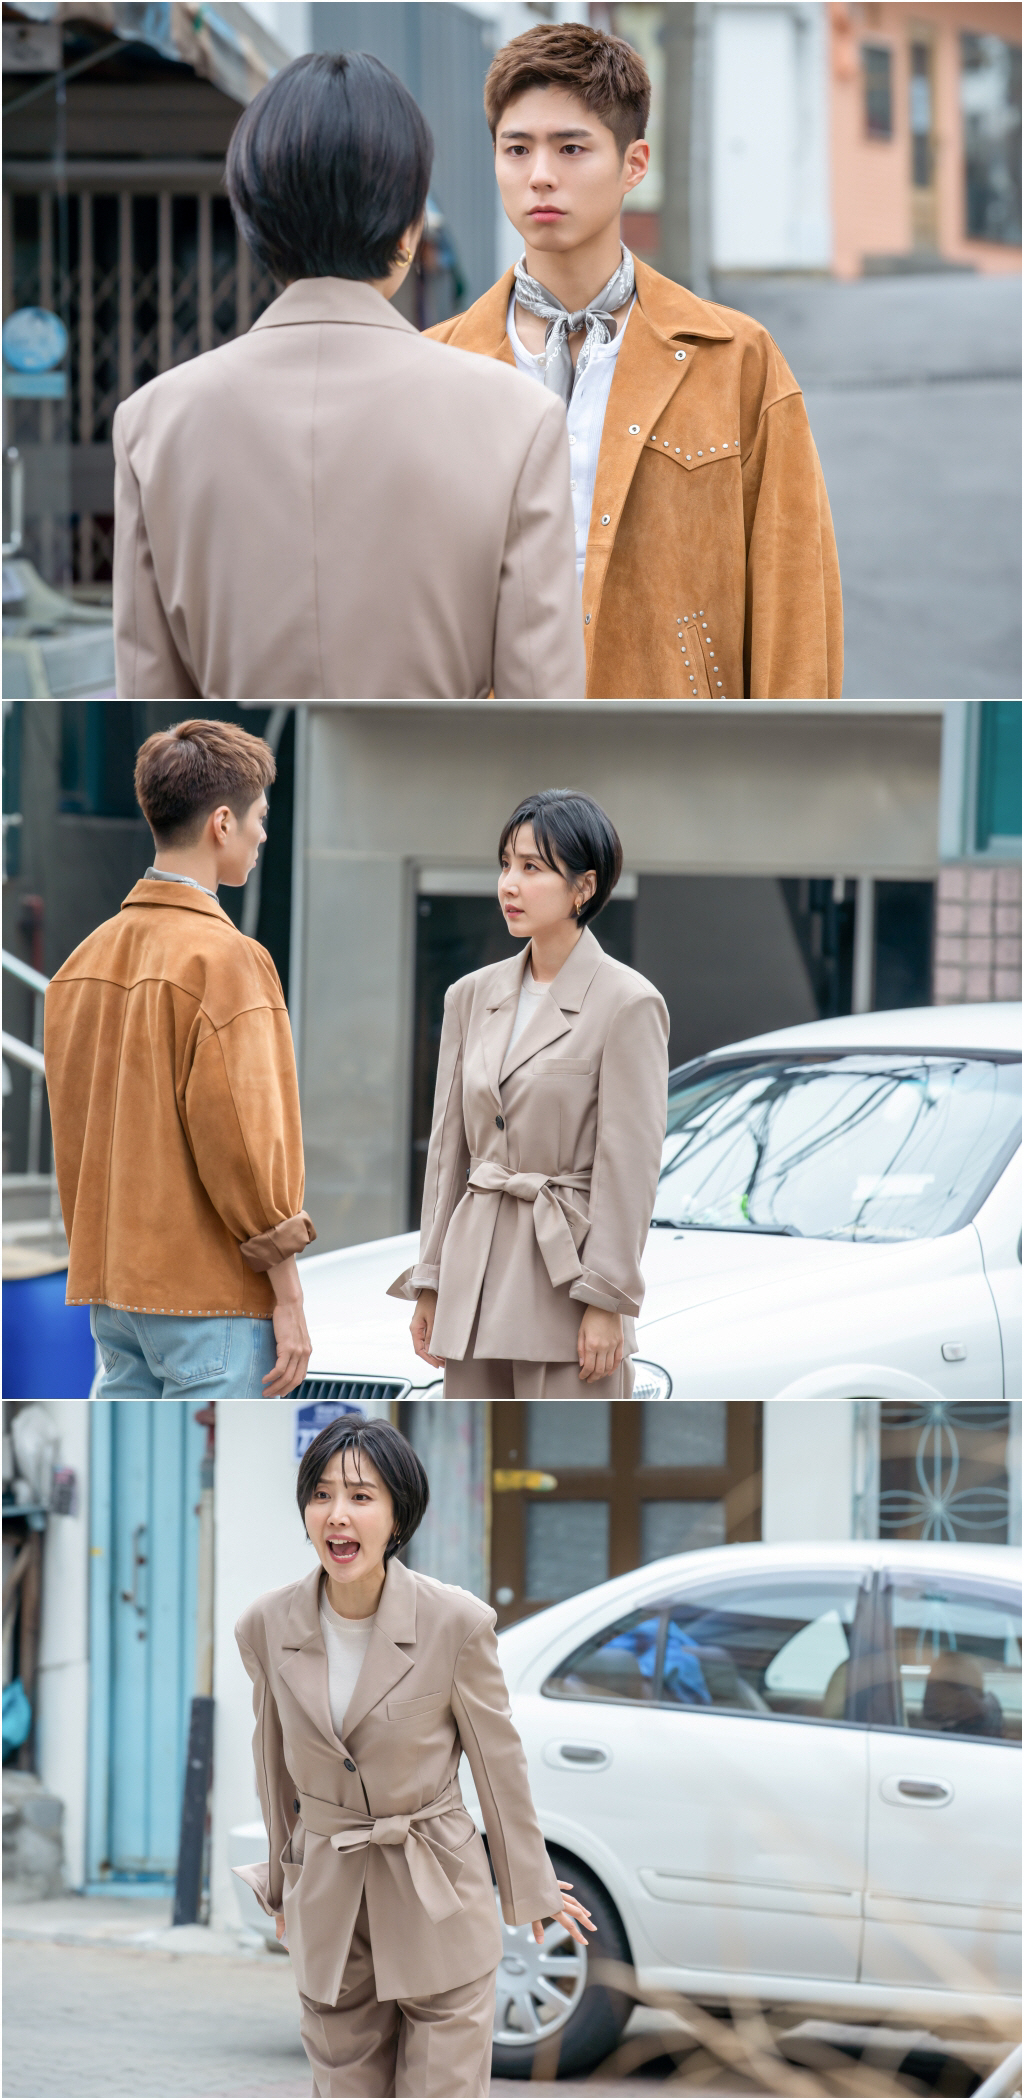 Will the opportunity to keep the dream come back to Record of Youth Park Bo-gum?TVN Mon-Tue drama Record of Youth (director Ahn Gil-ho, playwright Ha Myung-hee, production fan entertainment, studio dragon) captured Lee Min-jae (Shin Dong-mi), who visited Park Bo-gum with unexpected news on the 13th.Attention is focused on the two people who decided to start a new start in different directions.In the last broadcast, a picture of a young Sa Hye-joon, who met the turning point of life between dreams and reality, was drawn. Sa Hye-joon, who fell into the movie audition, decided to face reality and fold his dream.In front of such a sahyejun, Lee Min-jae handed out a ticket to Milan. In the sudden departure of the Milan fashion show, Sahyejun once again felt living.His Choices, who gave up his dream because he was passionate about his work more than anyone else and was desperate, added sadness.The Milan fashion show also caused a big wave for the first manager Lee Min-jae, who stepped out with his arms kicked in the face of Lee Tae-soo (Lee Chang-hoon), who interfered with the future of Sa Hye-joon.He was curious about Lee Min-jaes move to share someones dreams and to make them work well, as he felt the pride and joy he had never experienced before, as he watched Sa Hye-joon shining on the runway.In the meantime, the images of Sa Hye-joon and Lee Min-jae in the public photos stimulate curiosity.I feel his firm determination to put down everything in the appearance of Sa Hye-joon, who is not shaken by any words of Lee Min-jae.Lee Min-jae, who is angry at Sa Hye-joon, who has turned around without hesitation, is also interesting.In the third episode, which will be broadcast tomorrow (14th), another Choices moment comes to Sa Hye-joon.In Milan, Lee Min-jae told him that he was special to Sa Hye-joon, who would go to the army realistically with the news of the audition.Lee Min-jae once again finds Sa Hye-joon and gives a surprise proposal with the real reason for falling out of the movie audition.It is noteworthy whether the mind of Sa Hye-joon, who gave up his dream of Actor, will be returned and a new tomorrow will be opened together.Record of Youth production team said, Please watch whether Sa Hye-joon, who faces reality, will try his dream again.On the other hand, the third episode of tvN Mon-Tue drama Record of Youth will be broadcast tomorrow (14th) at 9 pm.